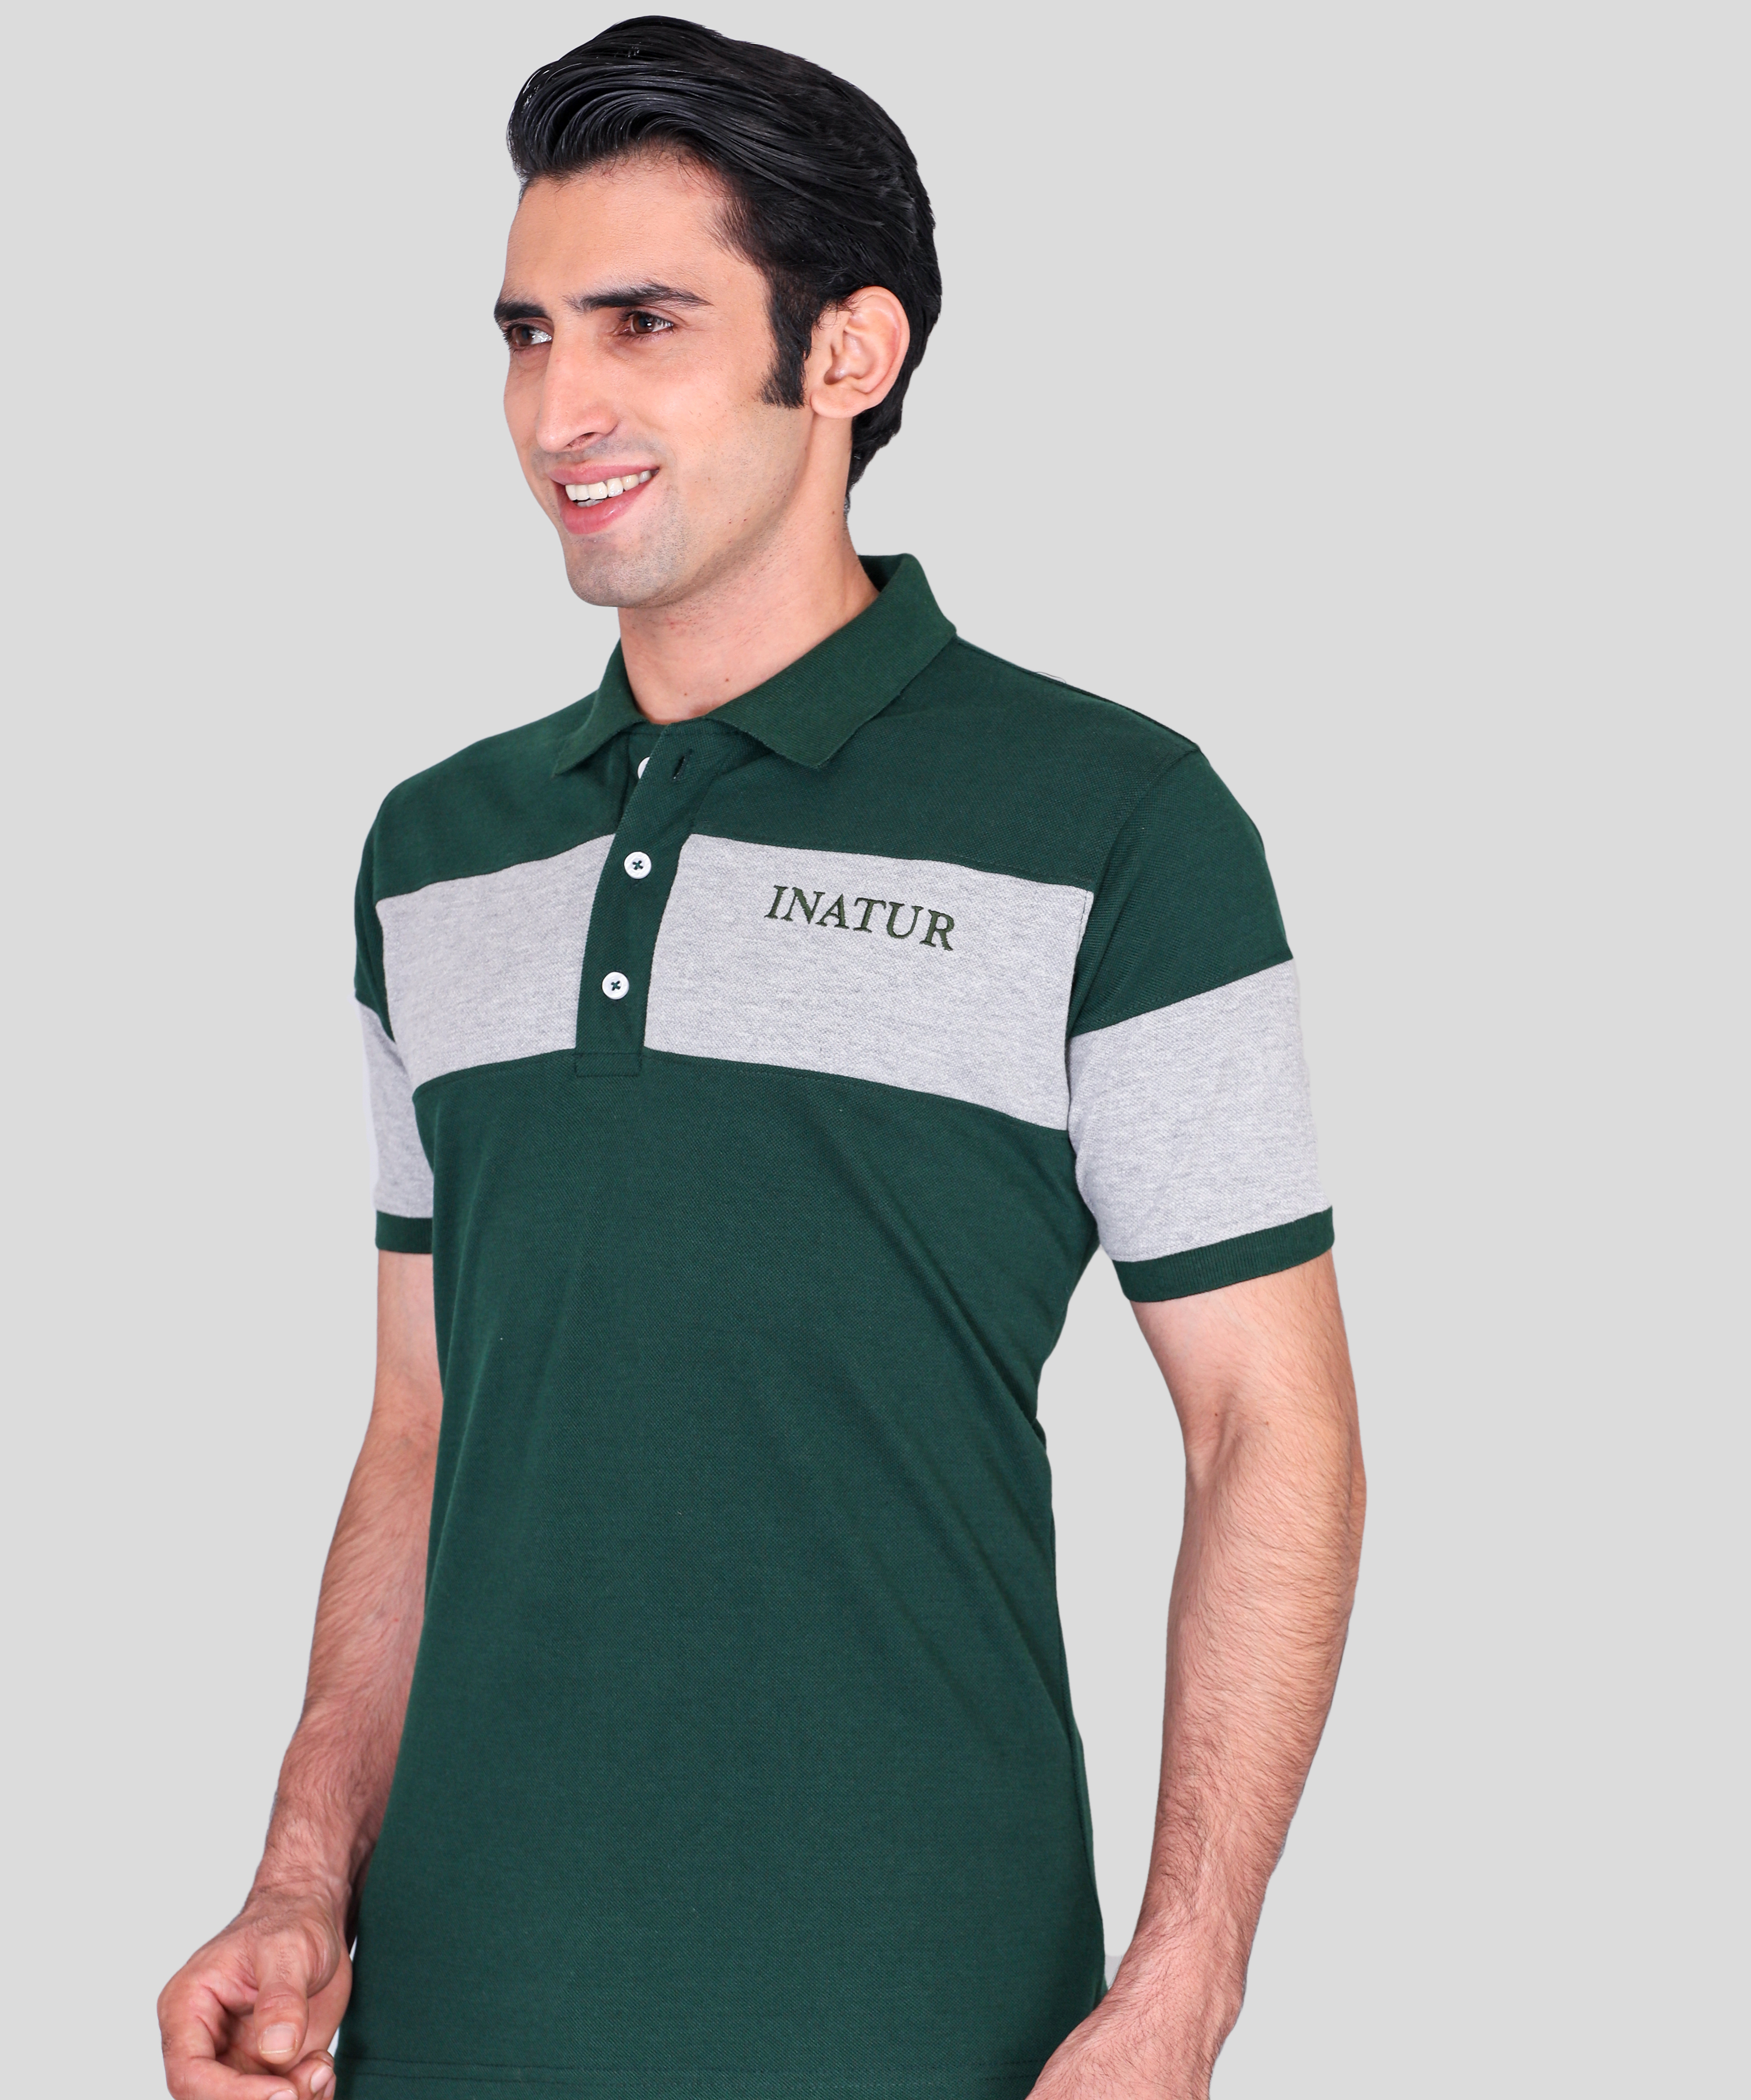 Inatur bottle green promotional polo t-shirts supplier 